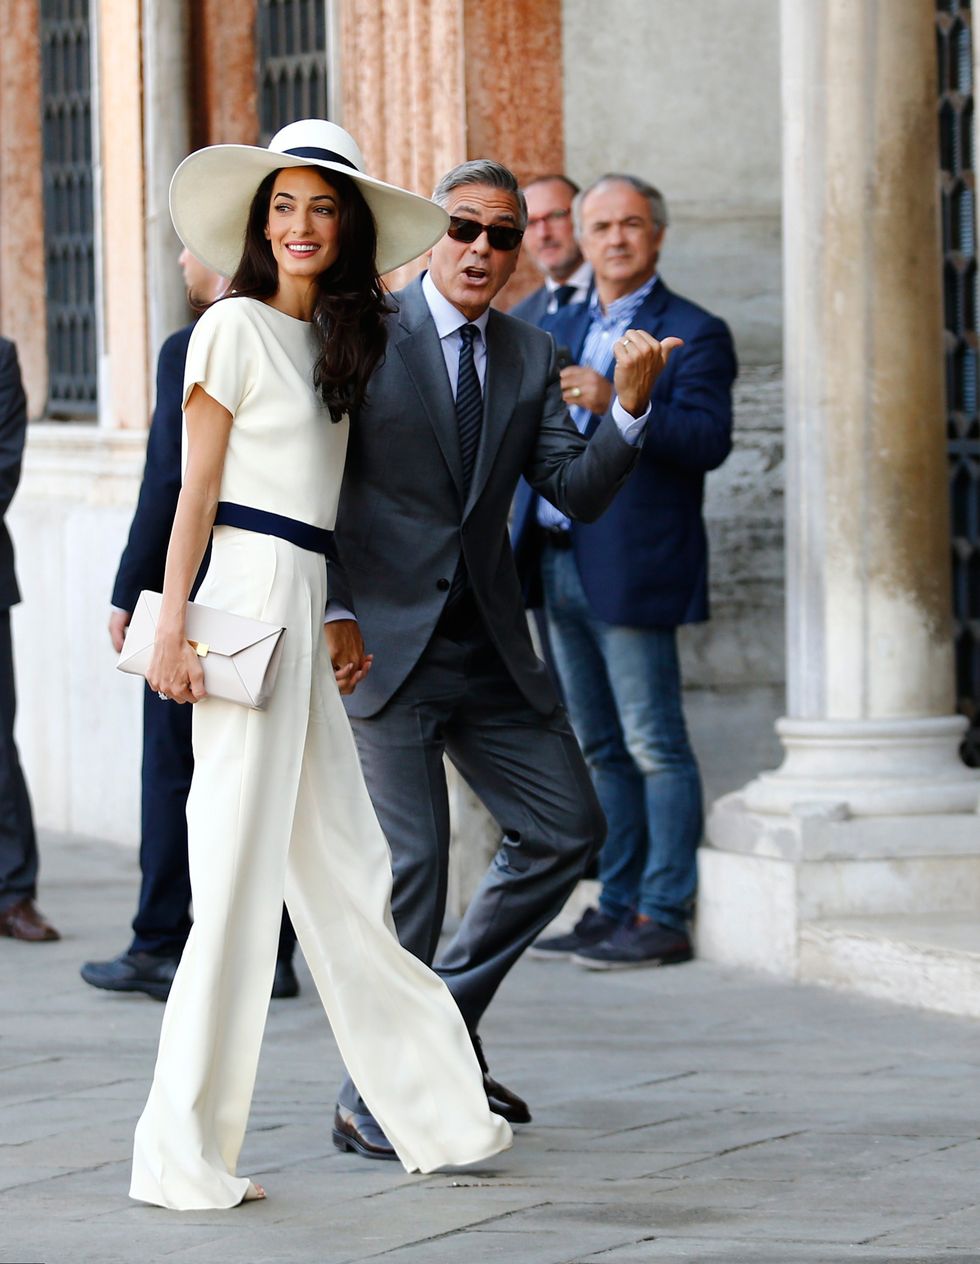 Amal Alamuddin and George Clooney in Venice for their wedding